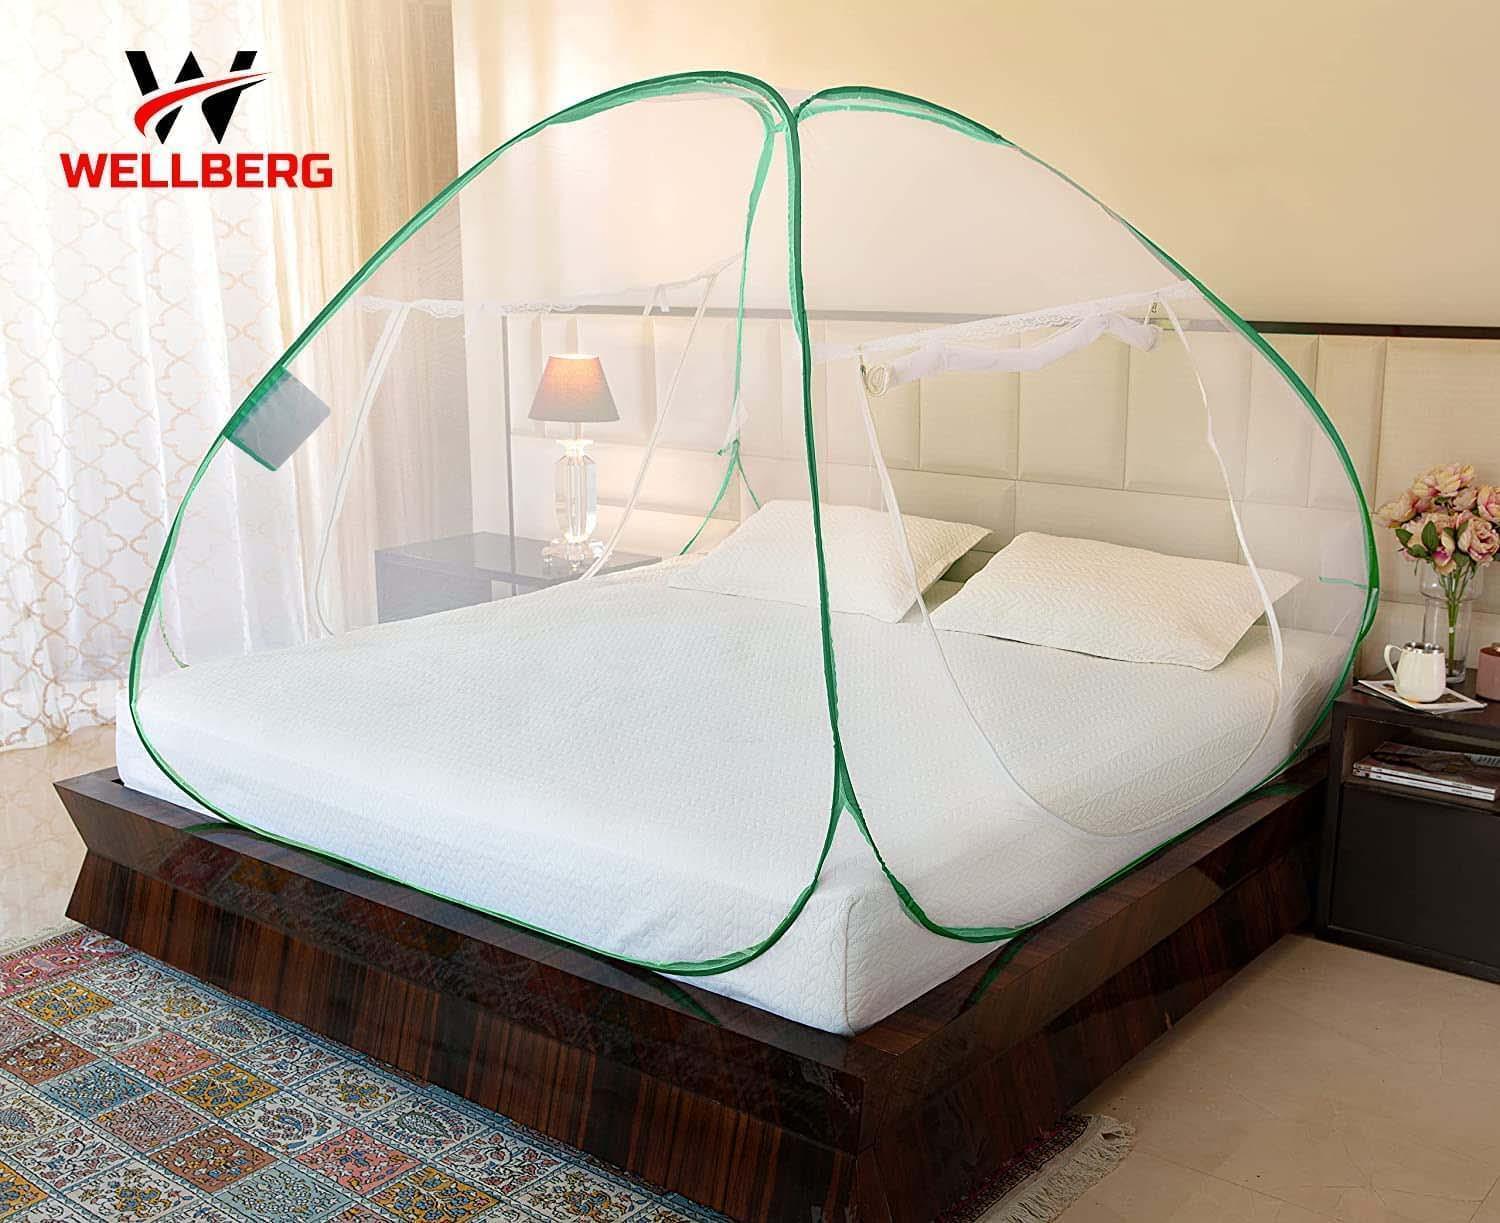 Wellberg Mosquito Net, Double Bed (King Size, 24-30 GSM, Foldable, Highly Durable) - Green - WELLBERG